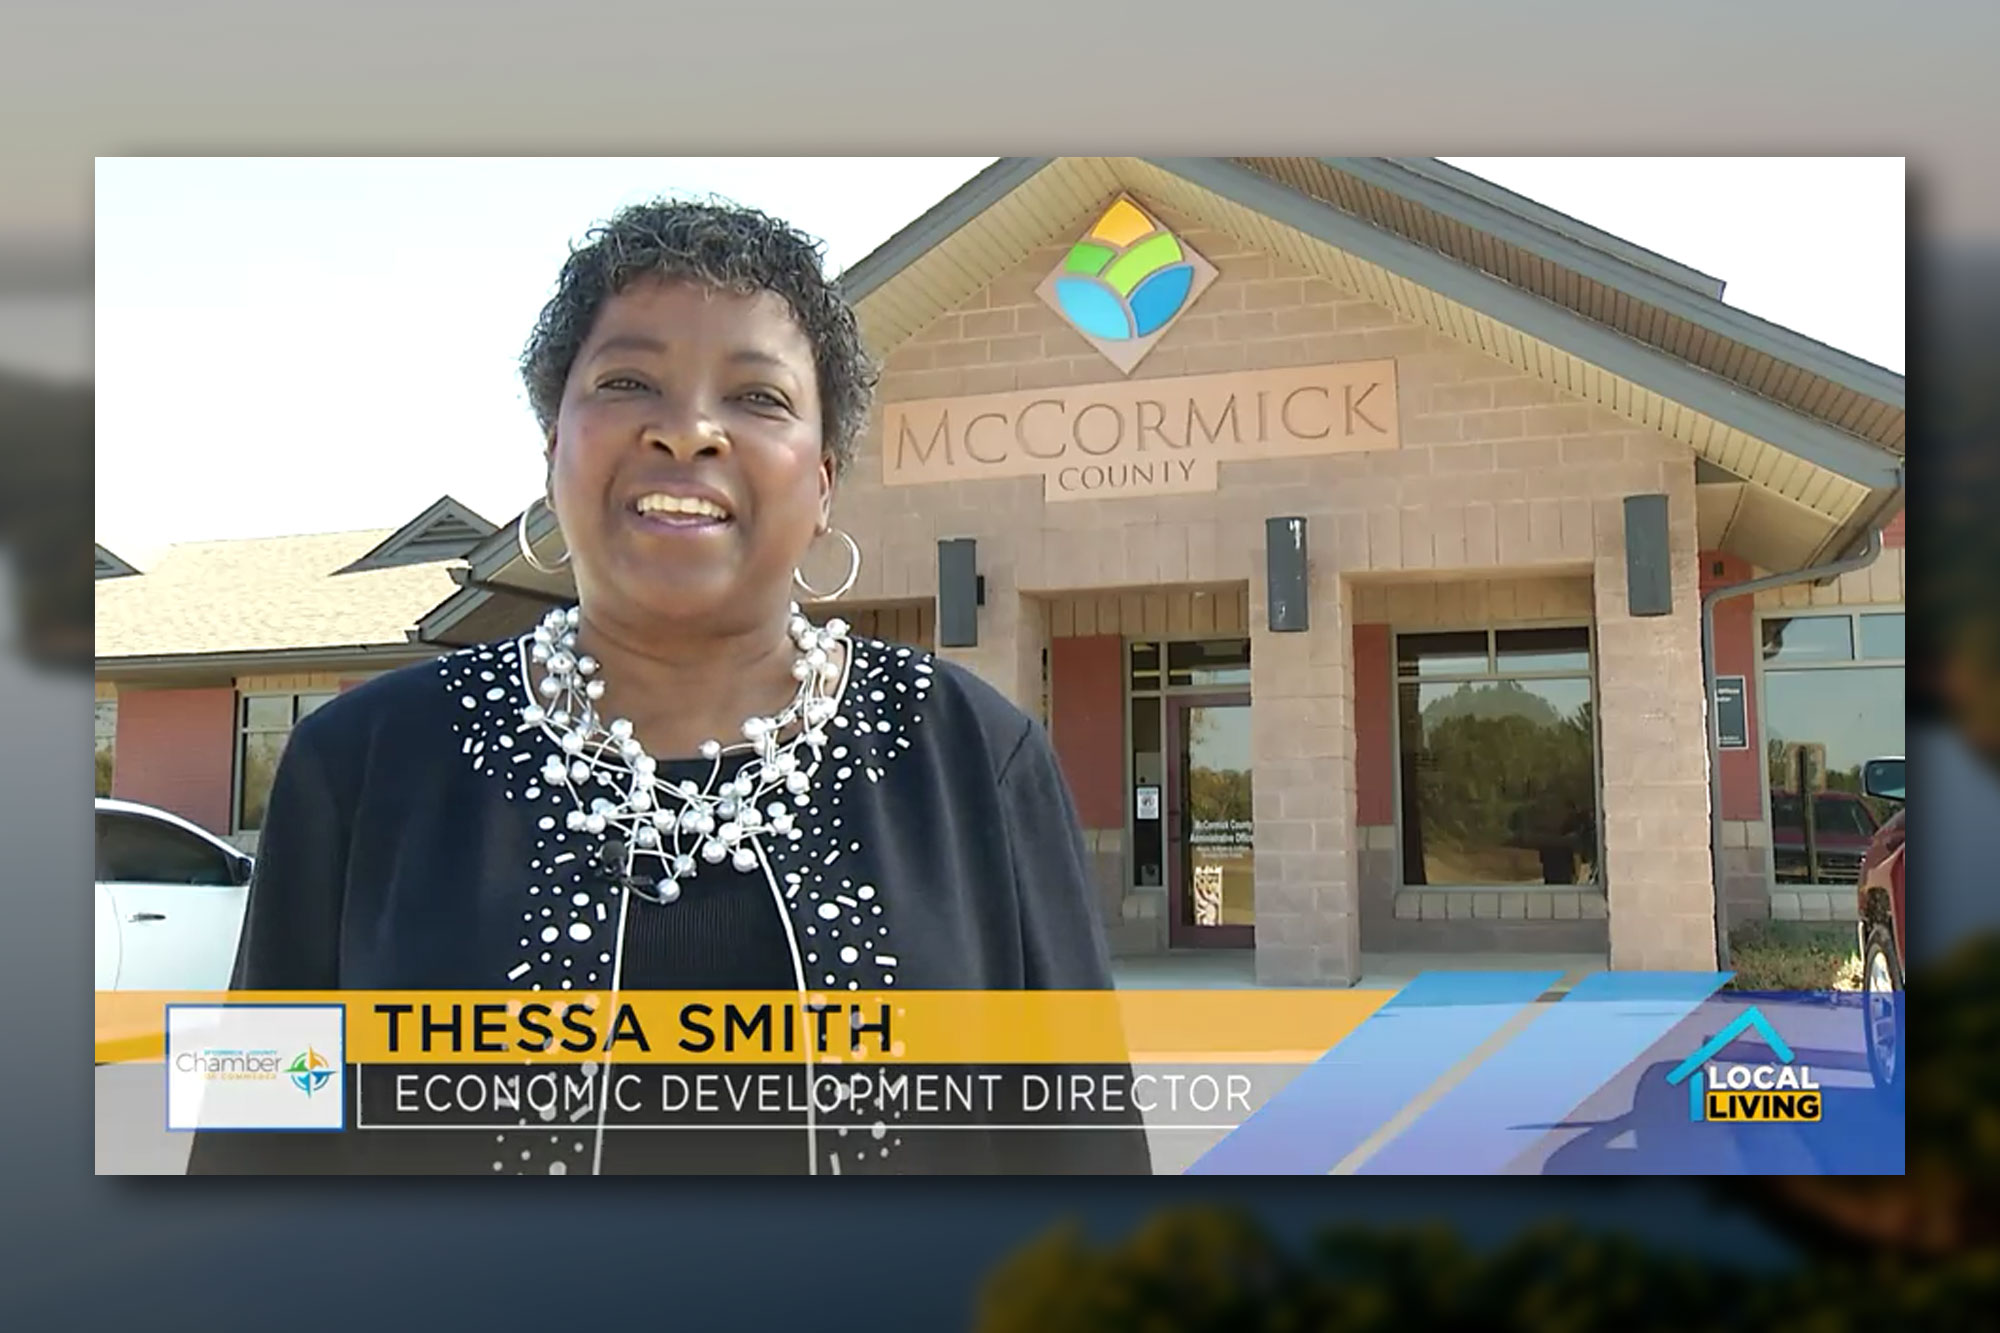 McCormick County Featured in Segment on Augusta ABC Affiliate WJBF's “Local Living” Program